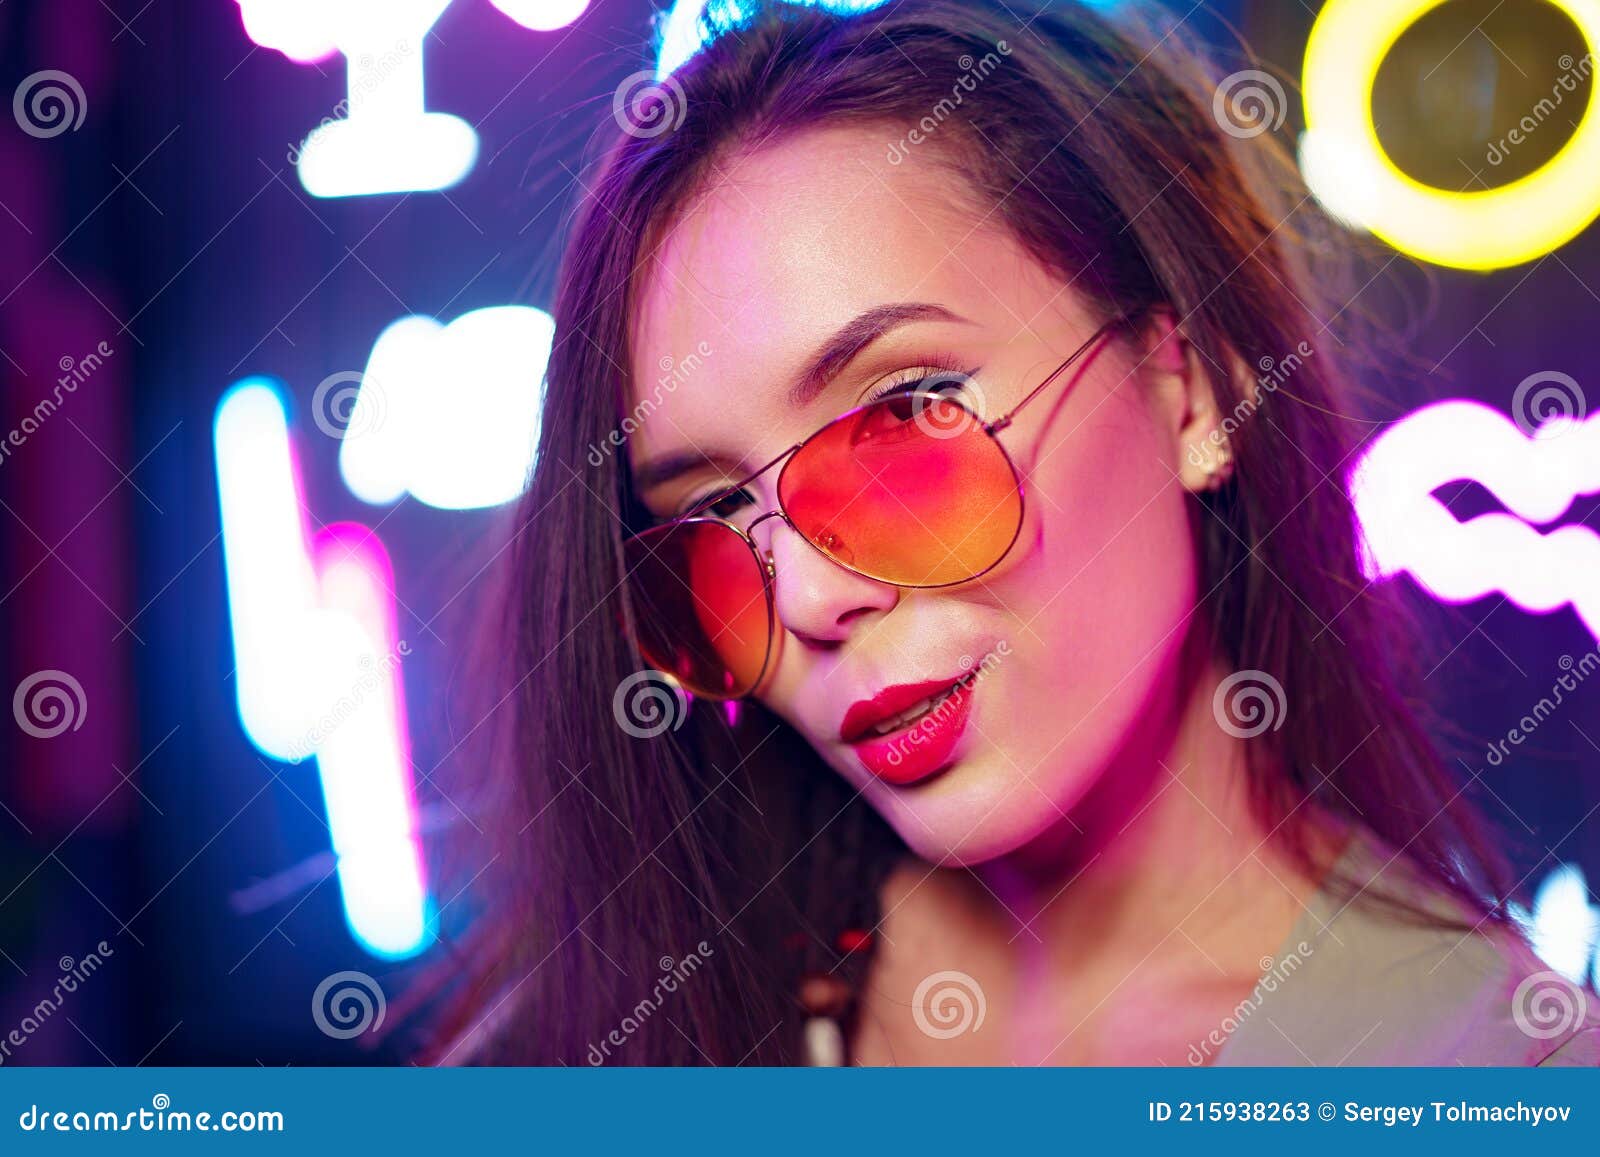 Fashion Portrait of a Young Woman in Sunglasses Posing Near Neon Signs ...